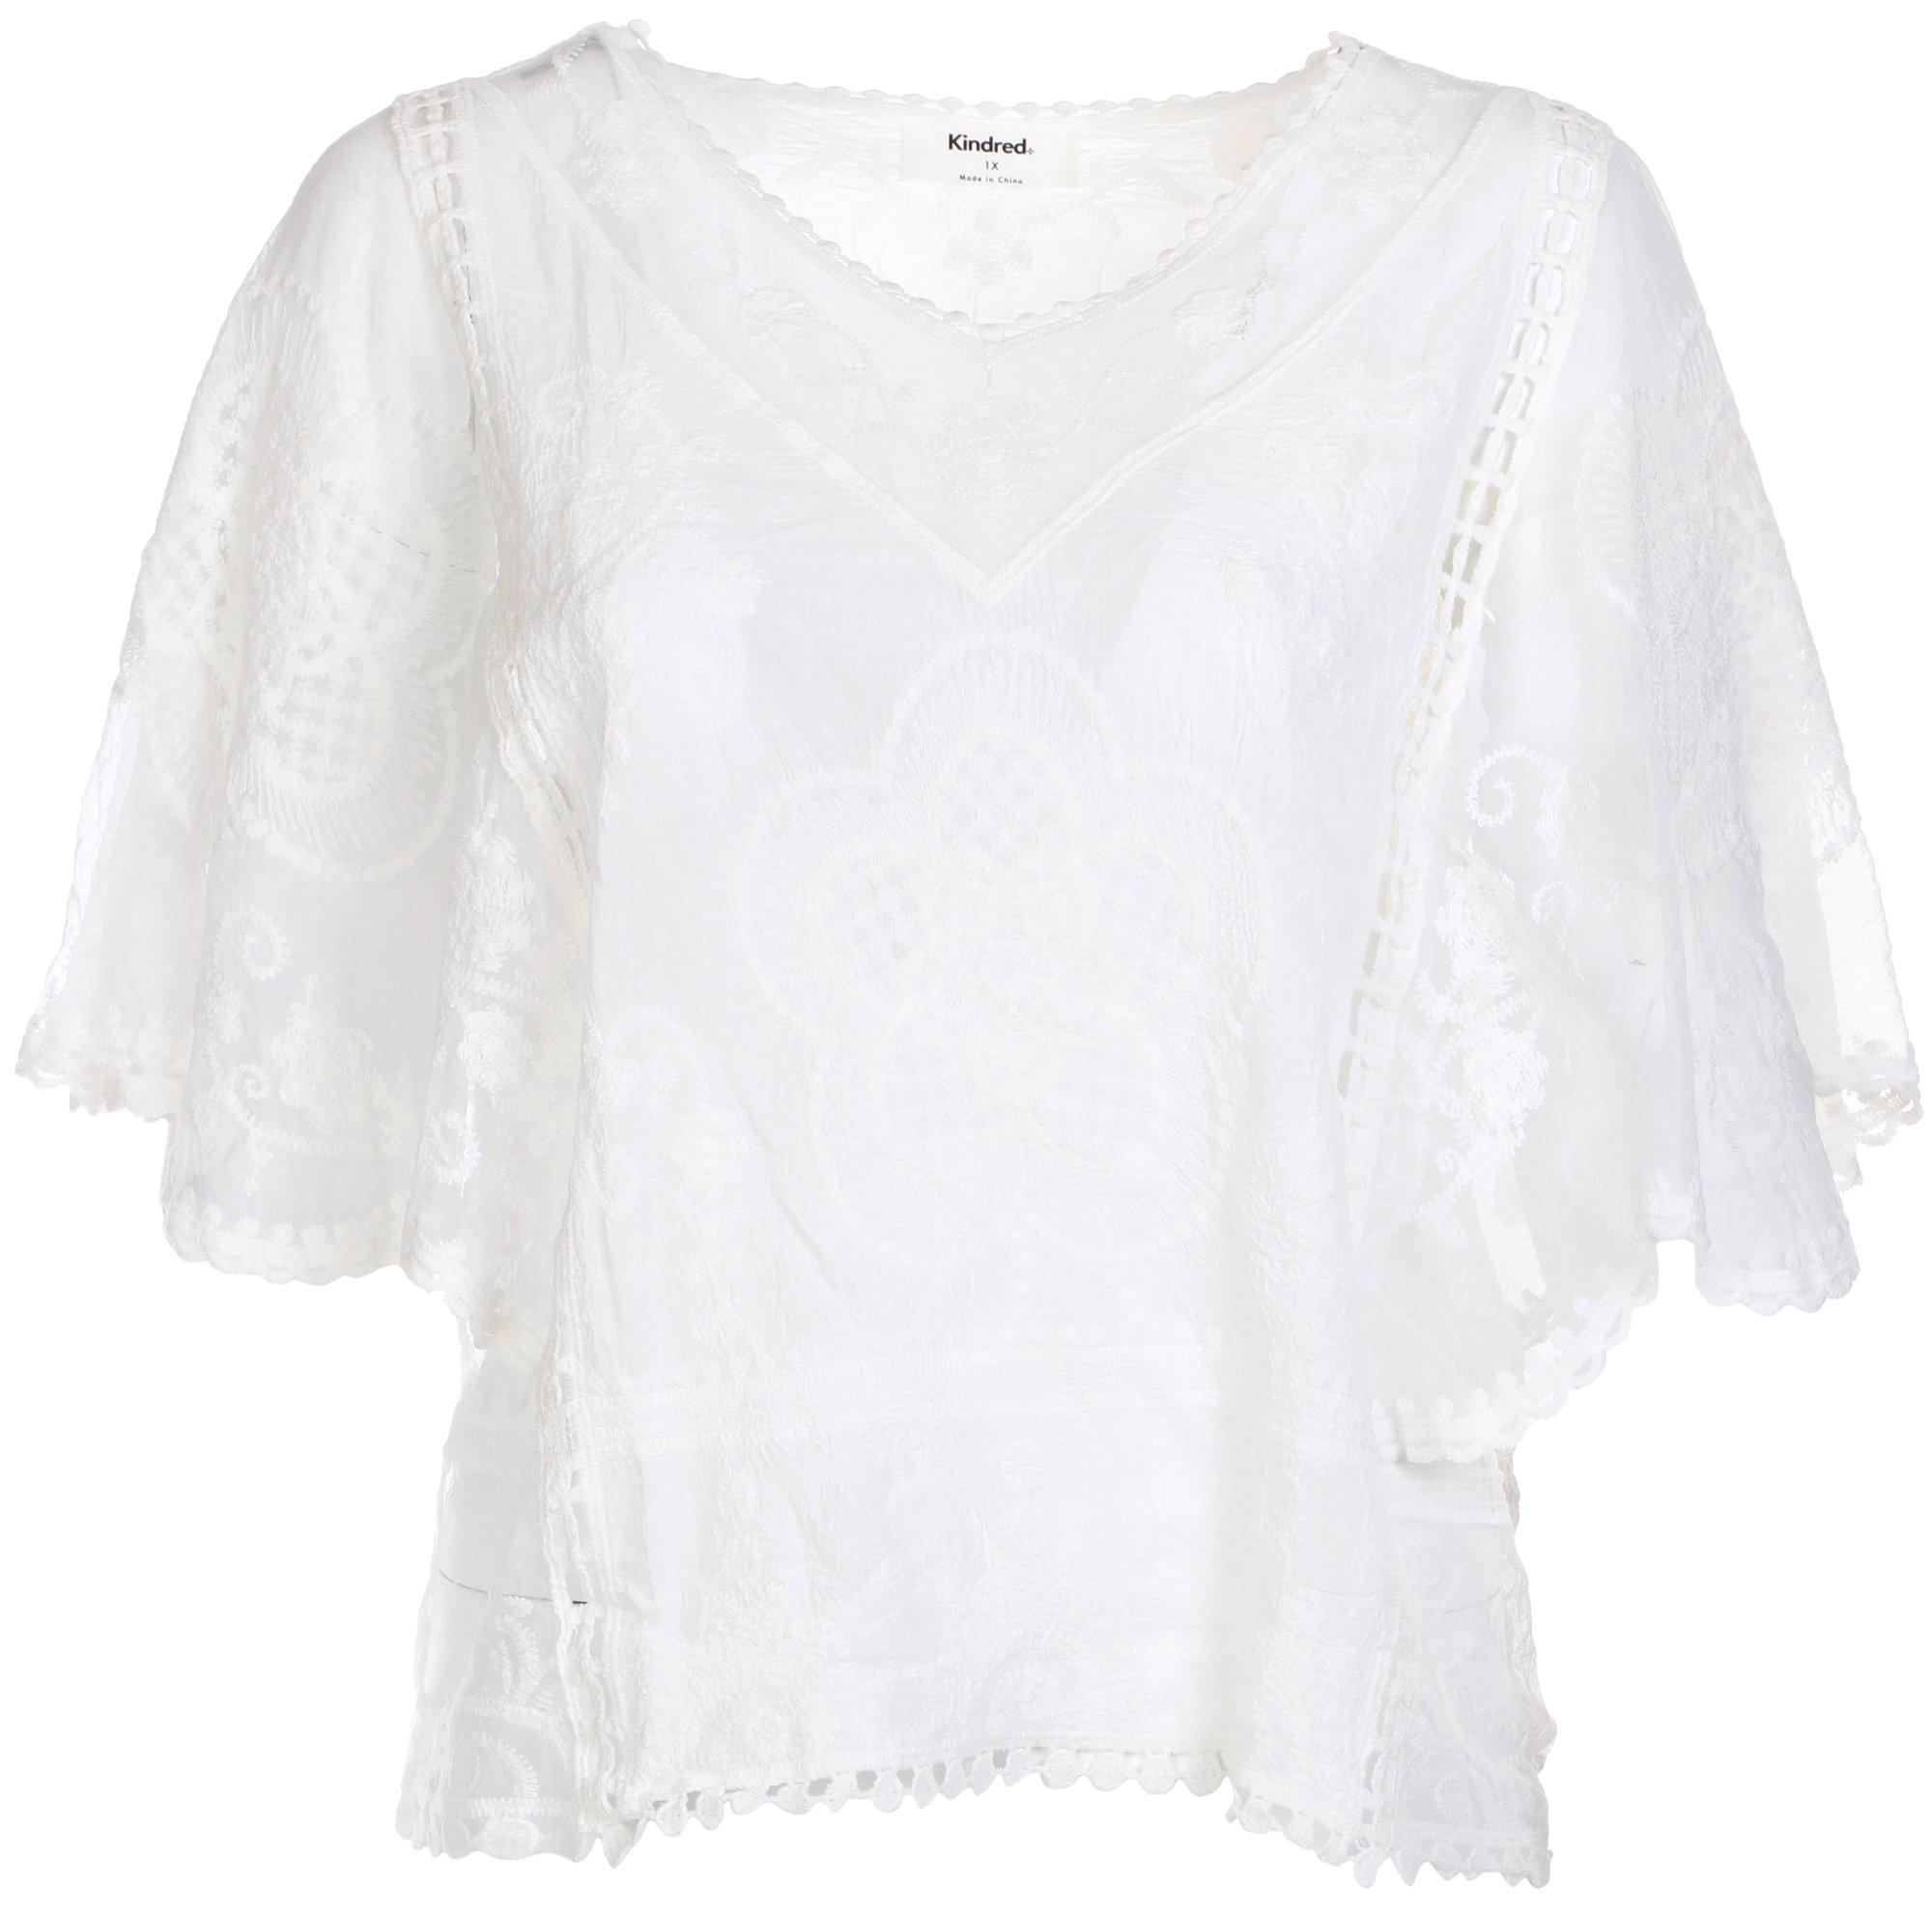 Women's Plus Embroidered Sheer Top